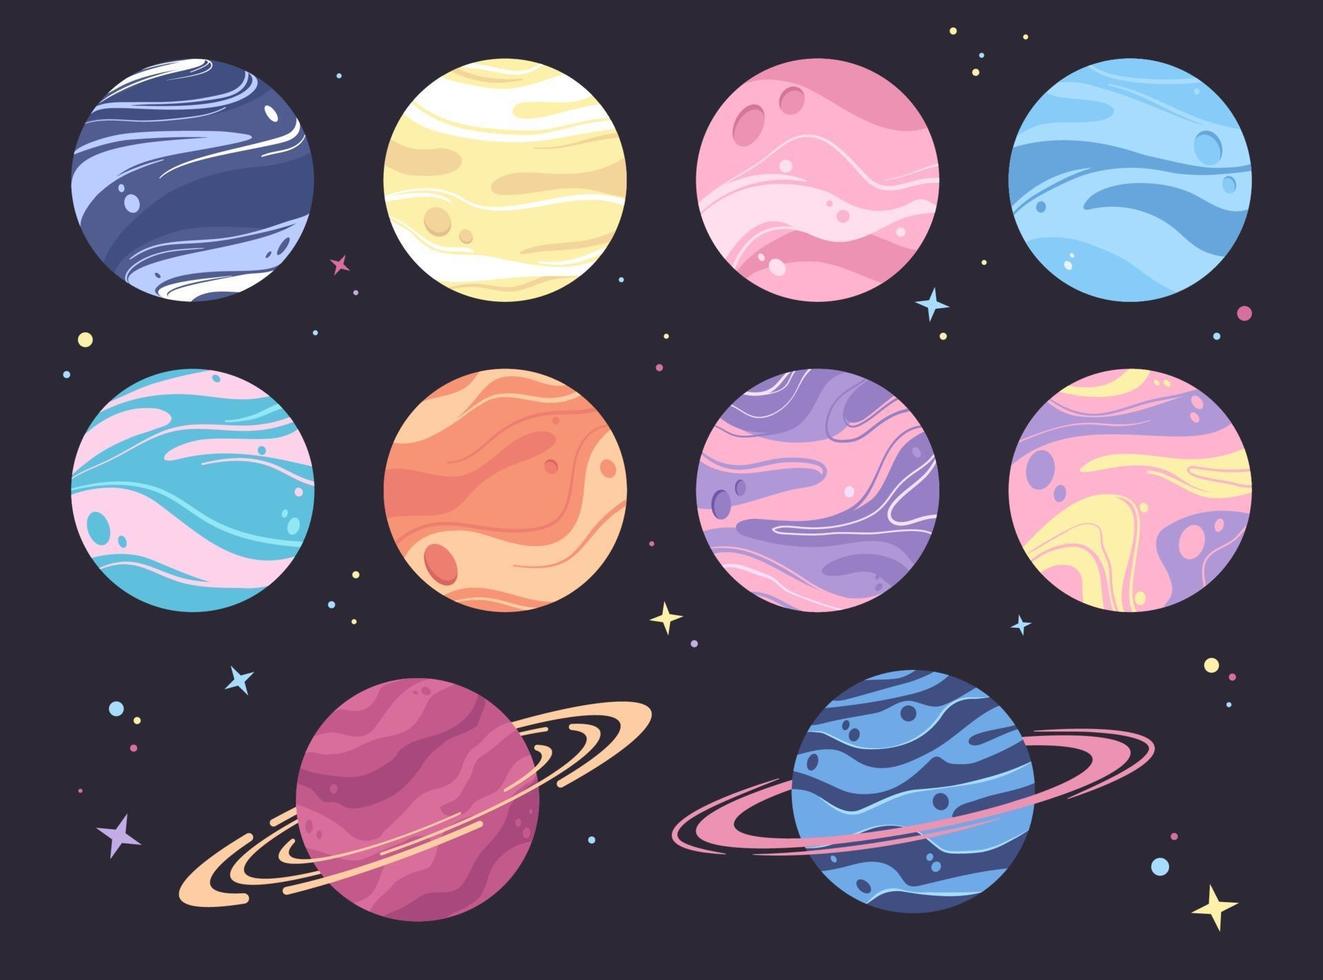 Planets, abstract illustrations vector